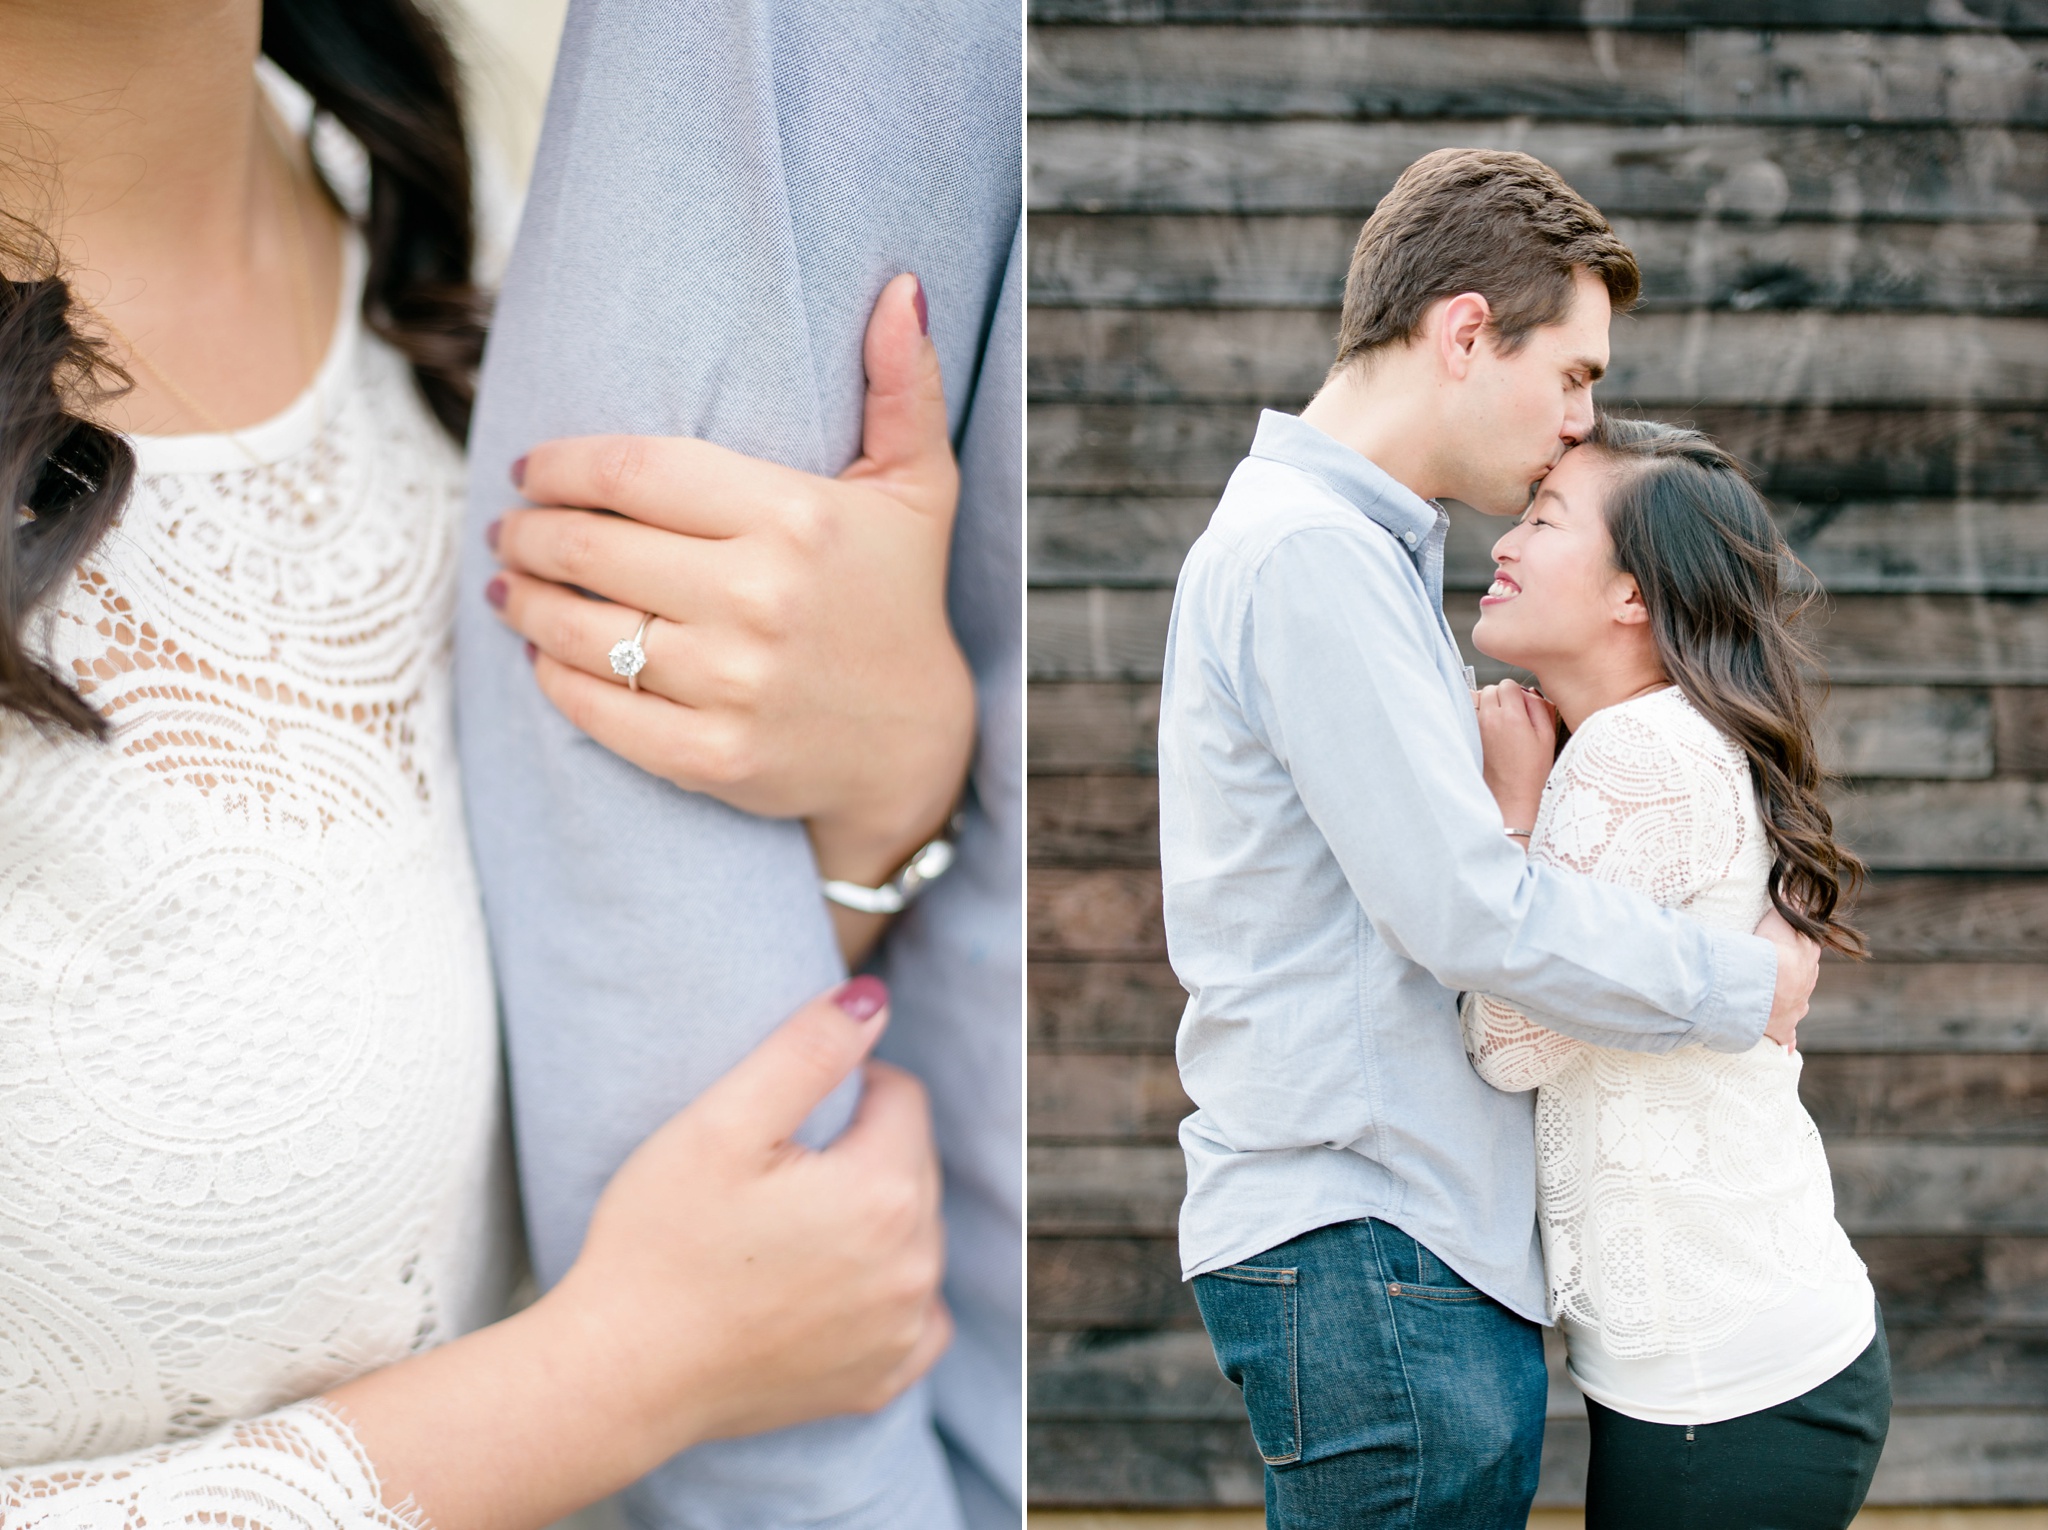 Downtown Nice to Have You in Birmingham Engagement Session| Birmingham Alabama Wedding Photographers_0009.jpg